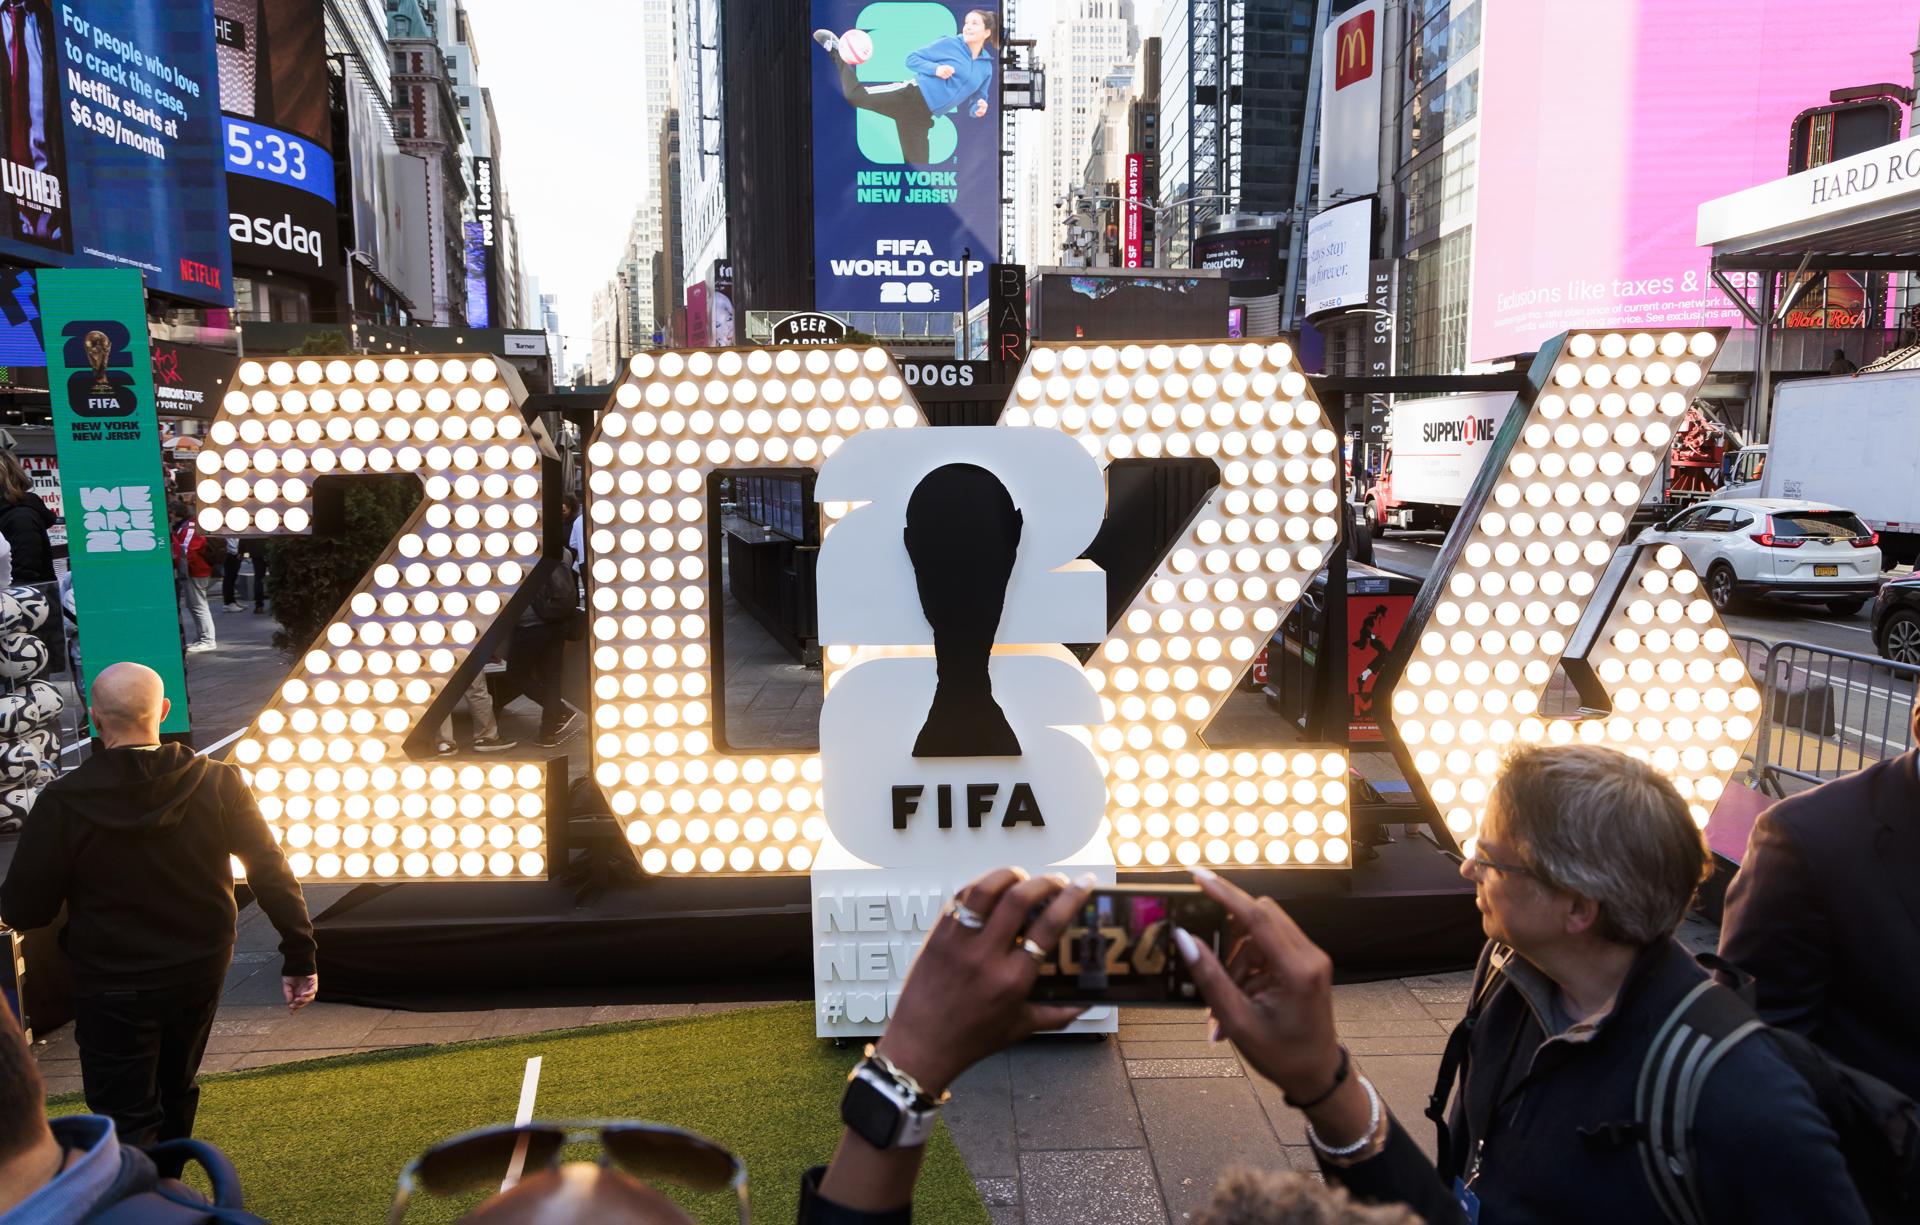 (FILE) Illuminated numbers displayed during an event with New Jersey Governor Phil Murphy and New York Mayor Eric Adams to promote newly unveiled branding and logo for New York and New Jersey hosting games during the 2026 FIFA World Cup tournament in Times Square in New York, New York, USA, 18 May 2023. (Estados Unidos, Nueva York) EFE/EPA/JUSTIN LANE